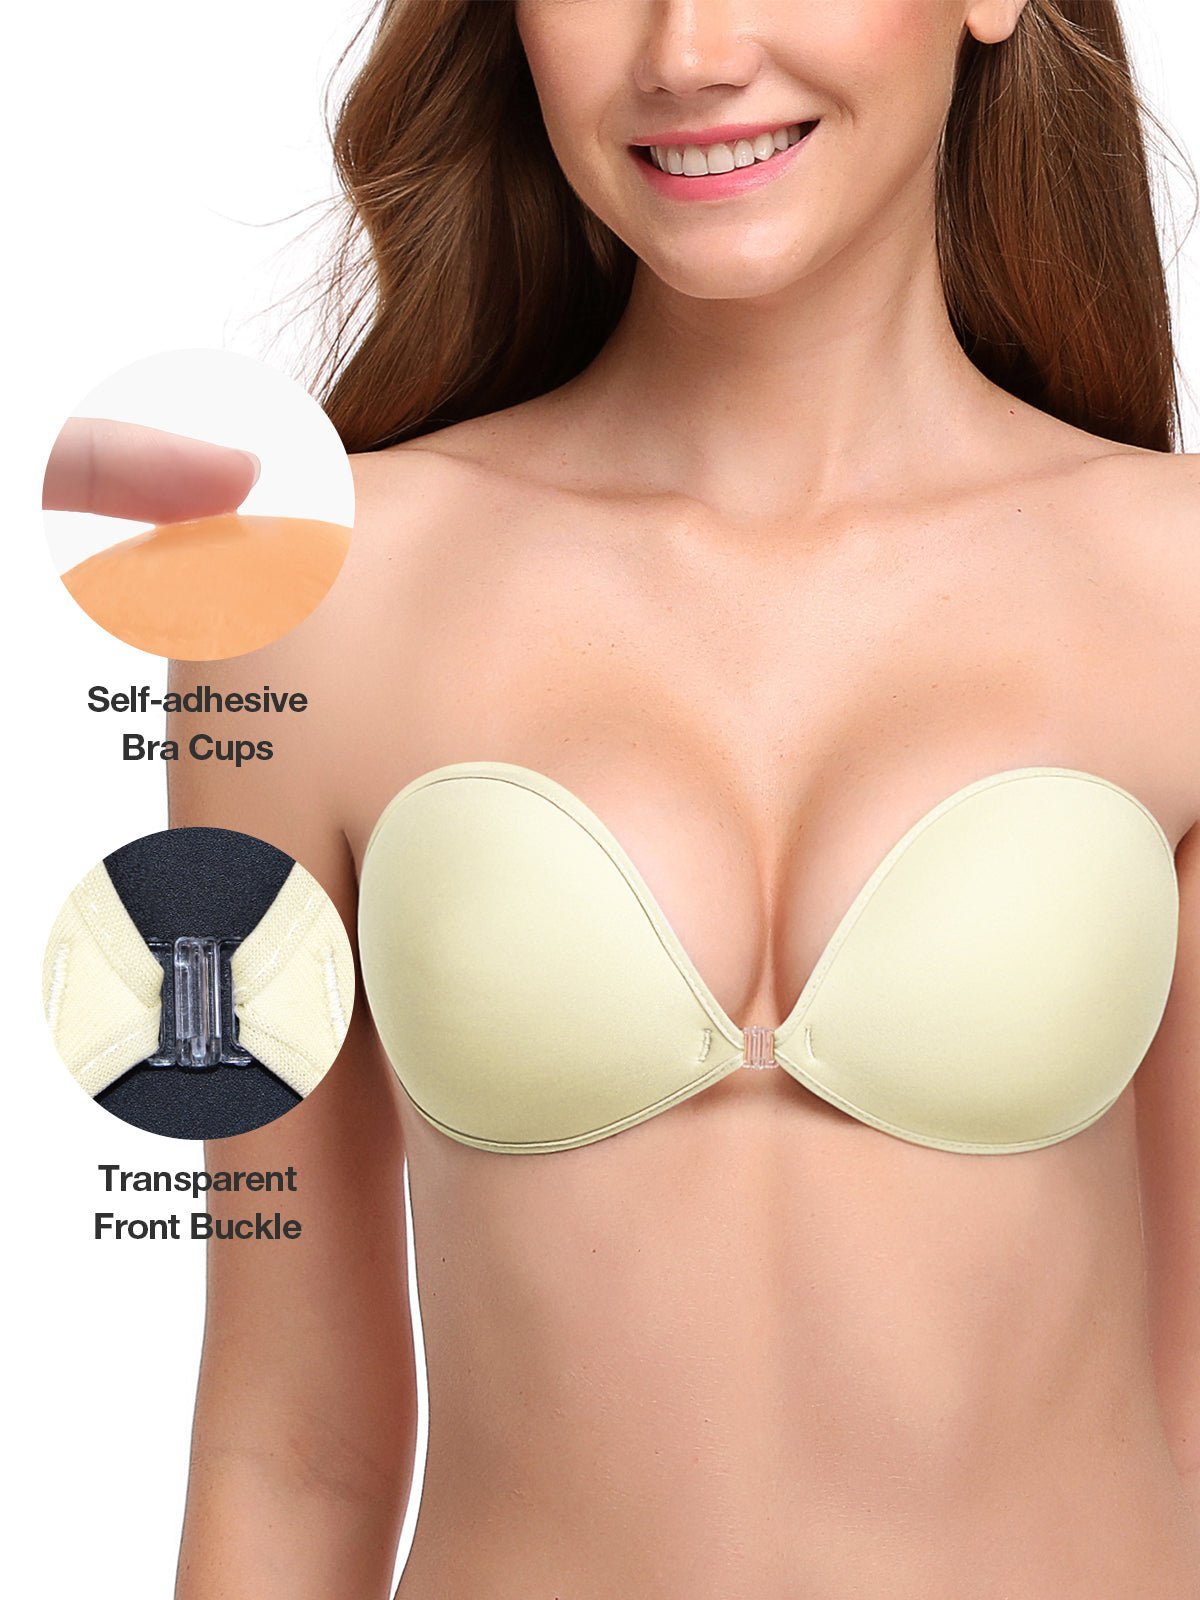 Adhesive Bra Push Up Invisible Bra Silicone Bra Cups: Buy Online